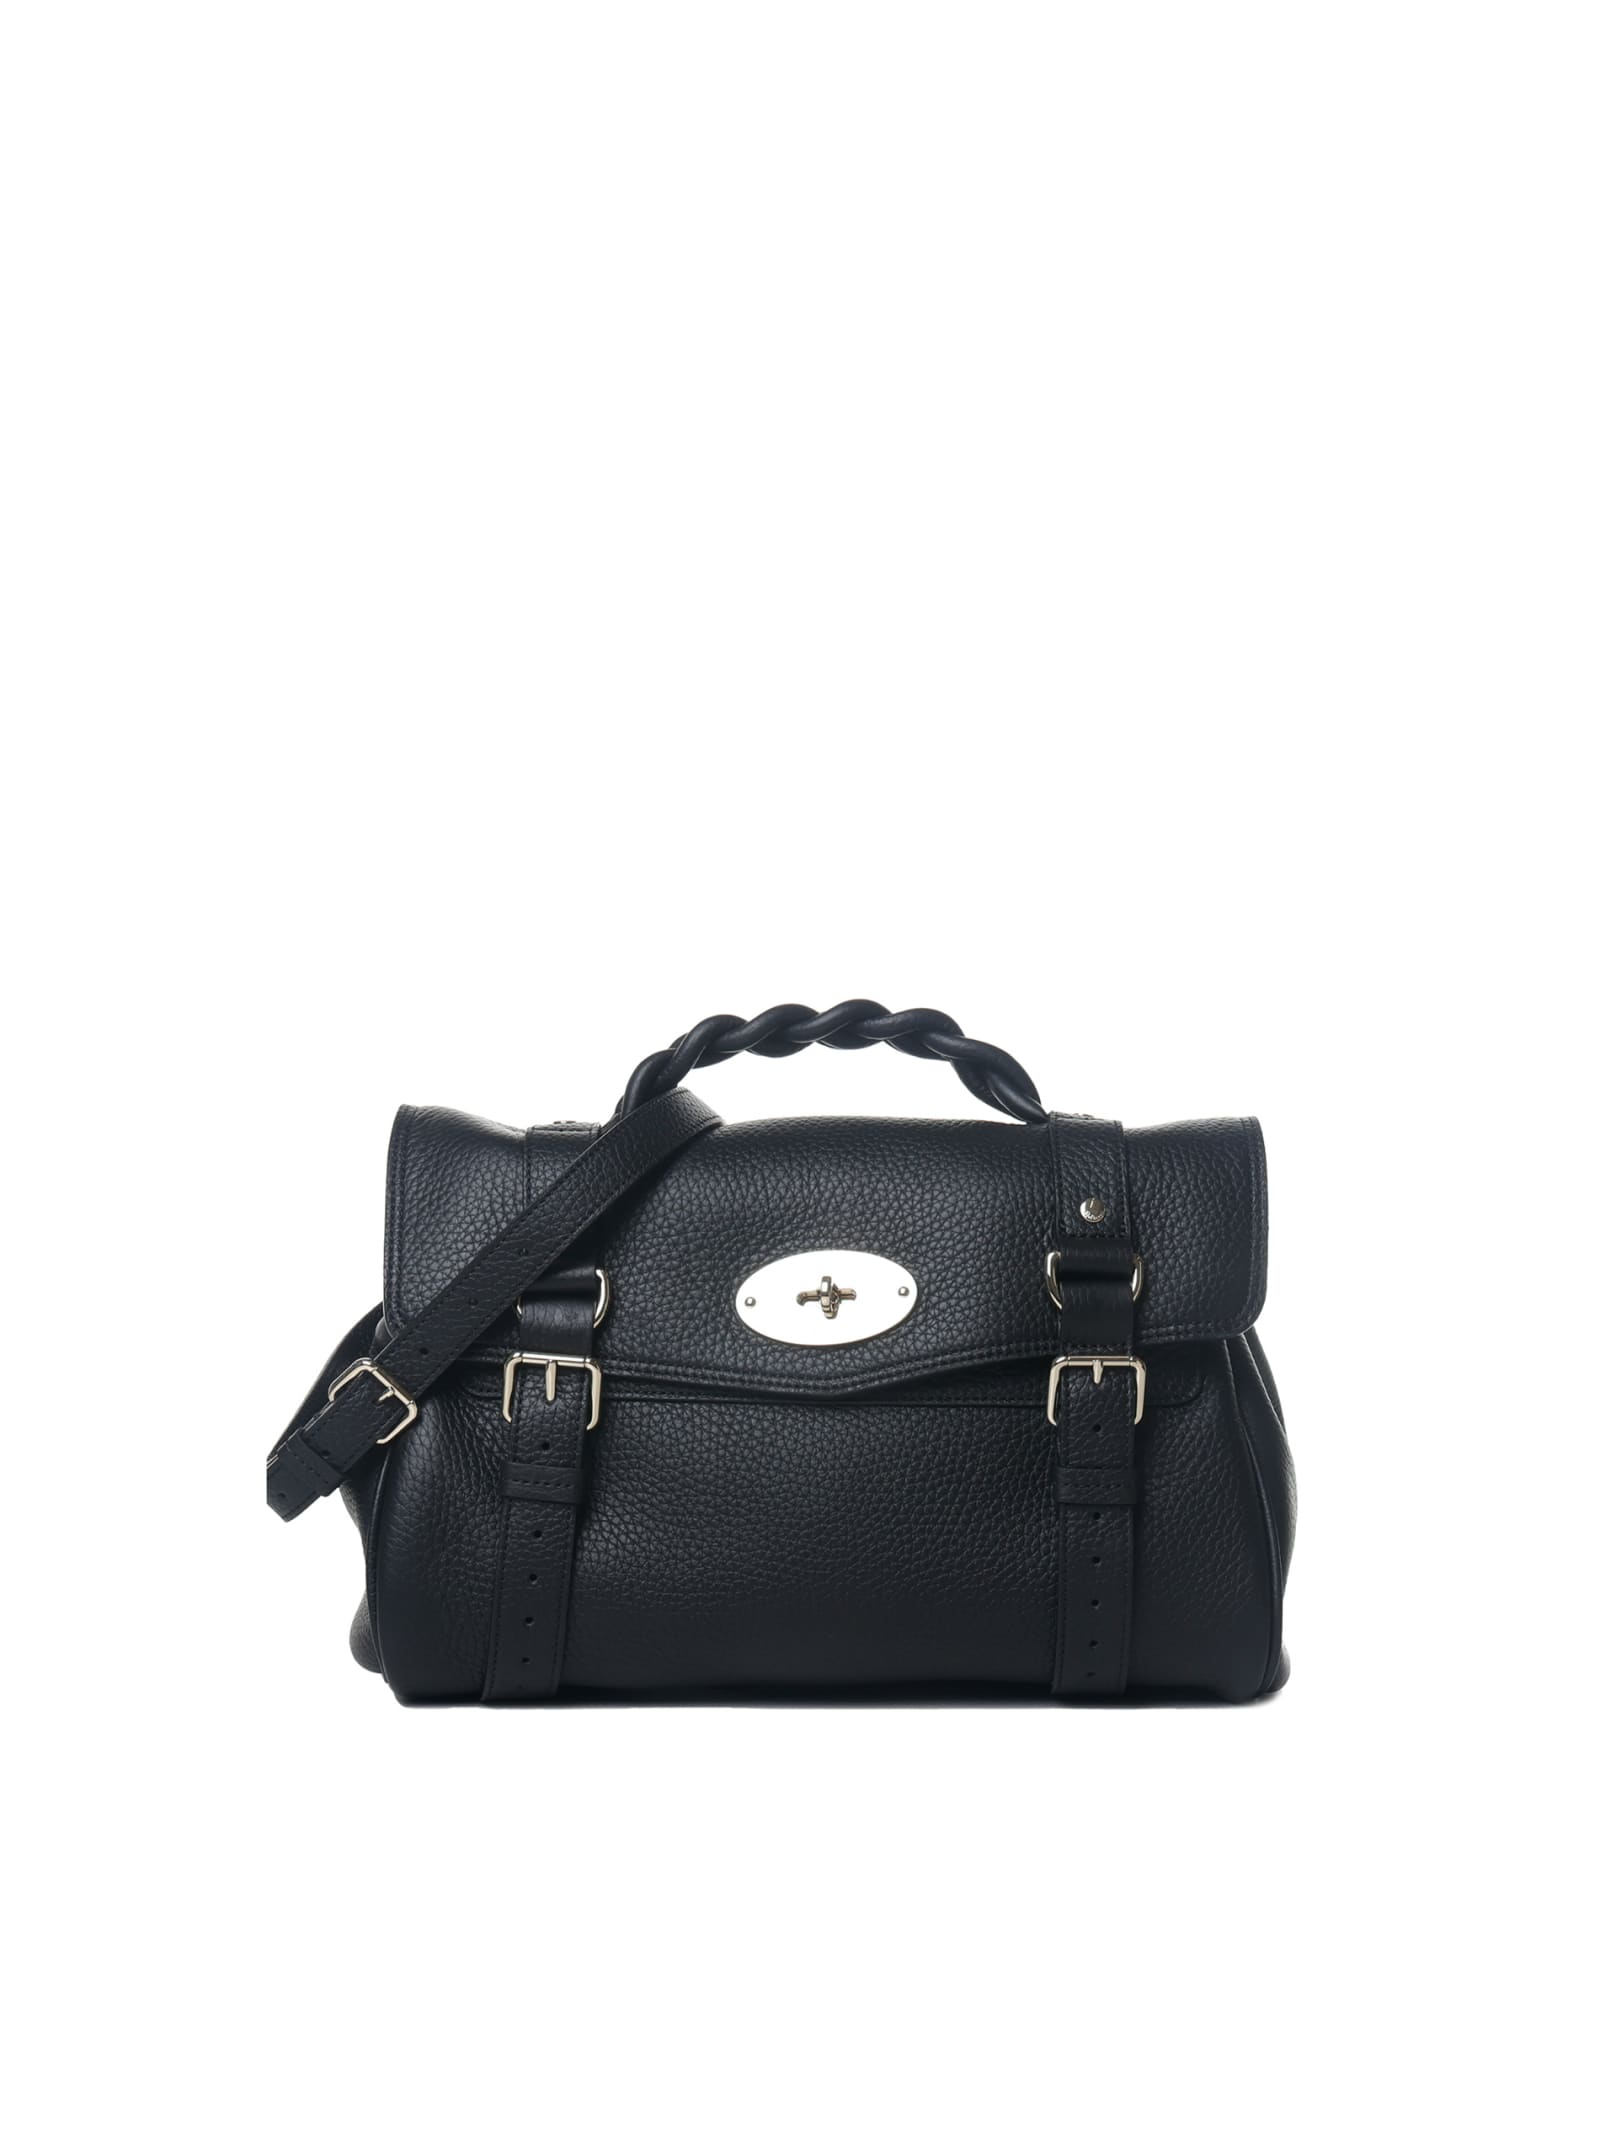 Mulberry Alexa Bag With Leather Braided Handle In Black